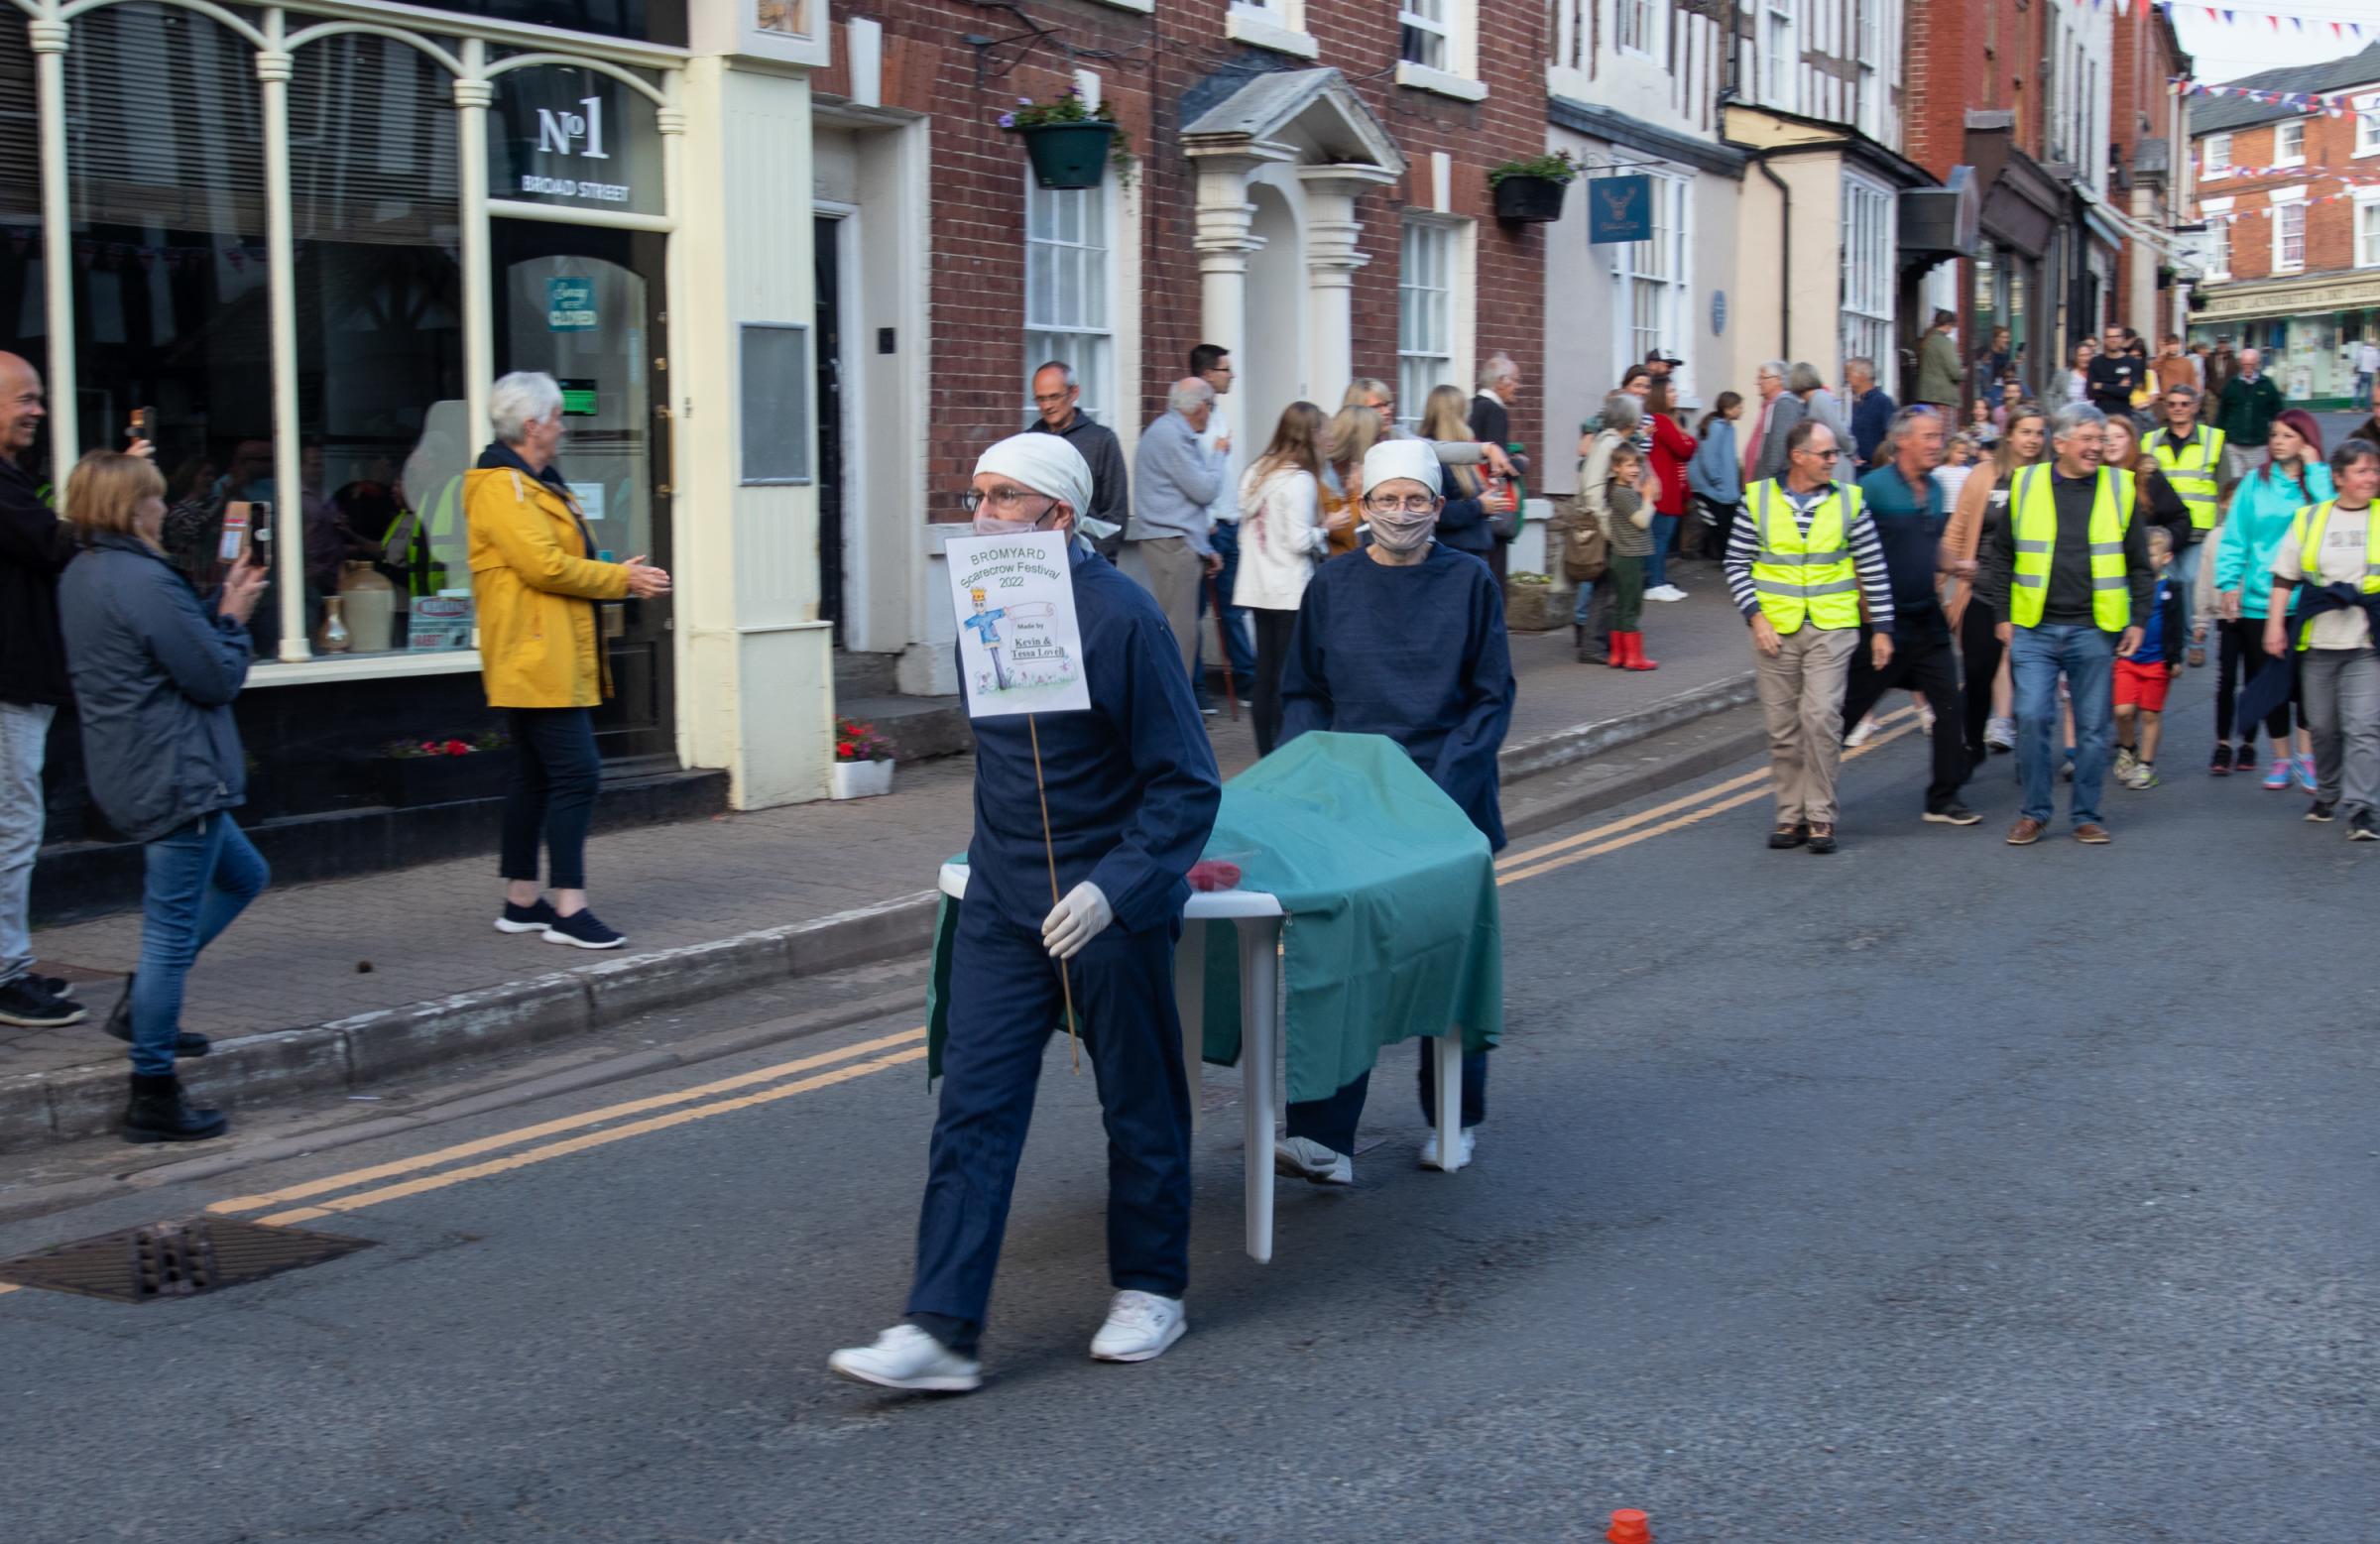 Kevin and Tessa Lovell in the Bromyard Scarecrow Festival procession. Picture: Sofie Smith